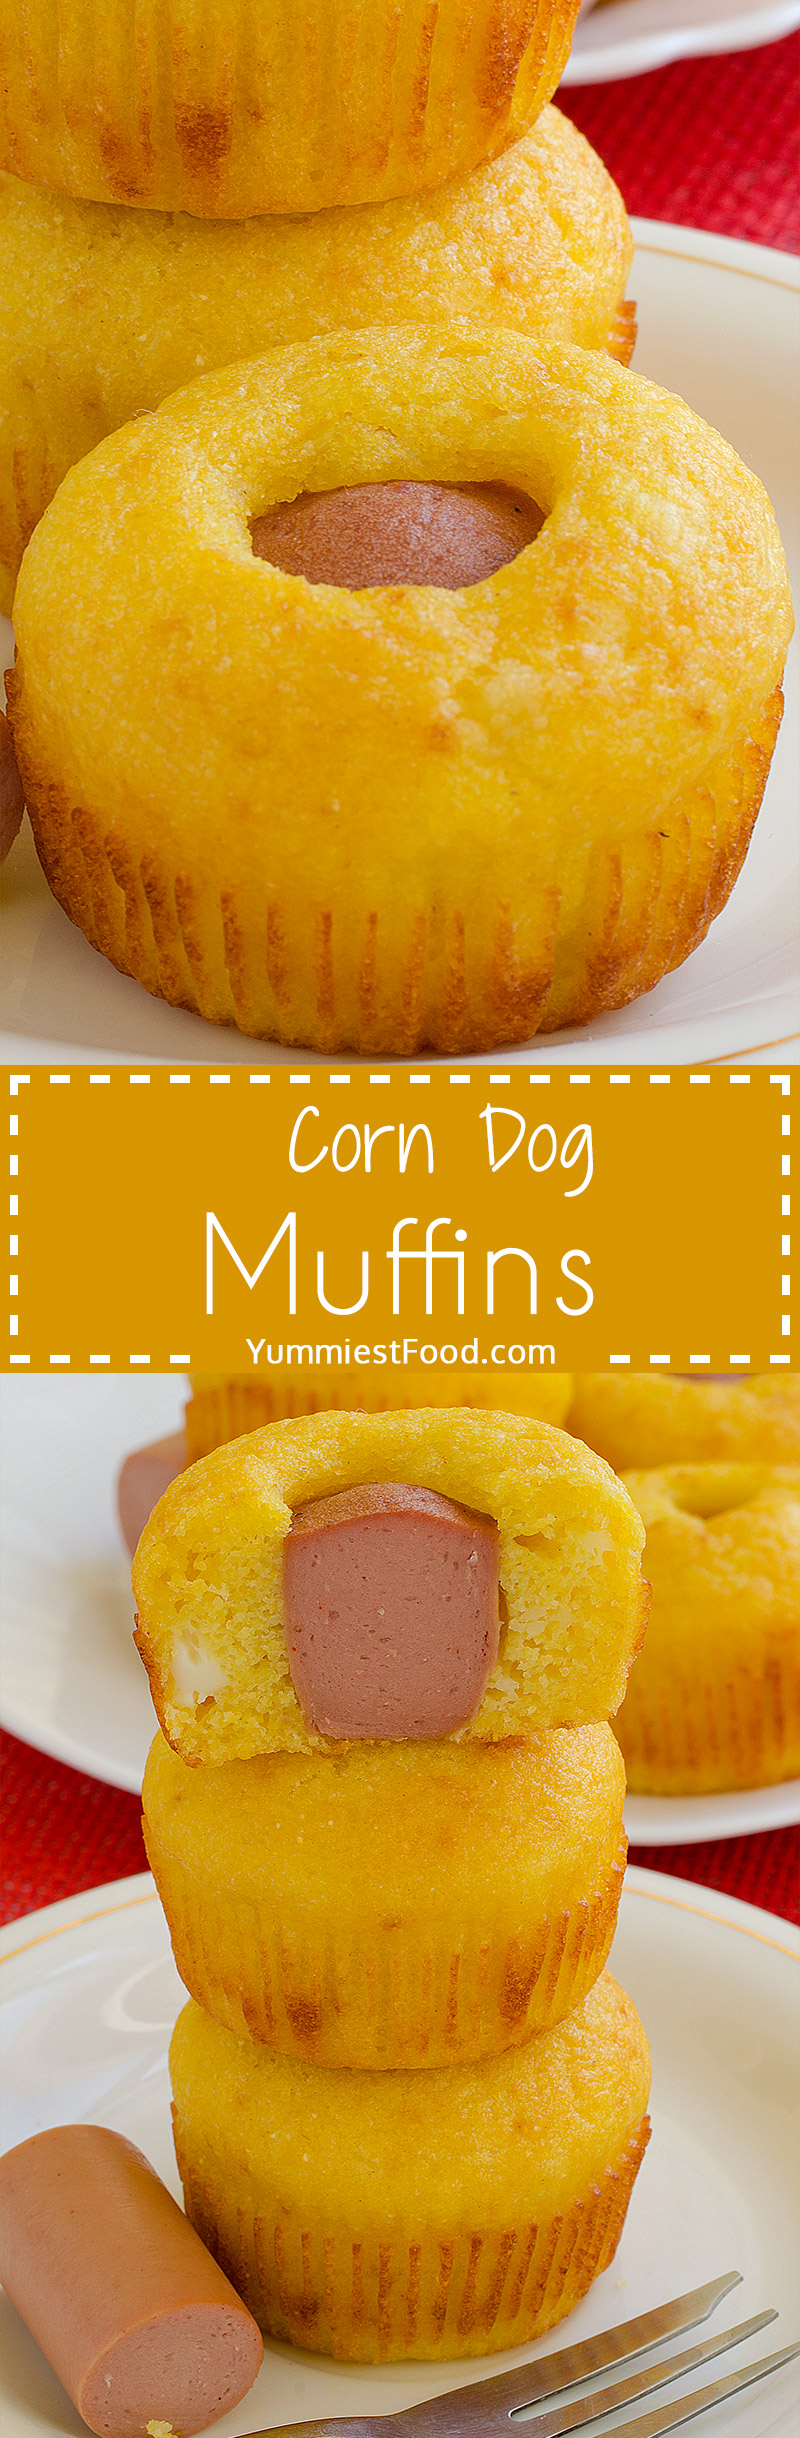 Corn Dog Muffins - You can also add ingredients you like the most and your family will enjoy in this Corn Dog Muffins which is perfect for breakfast.